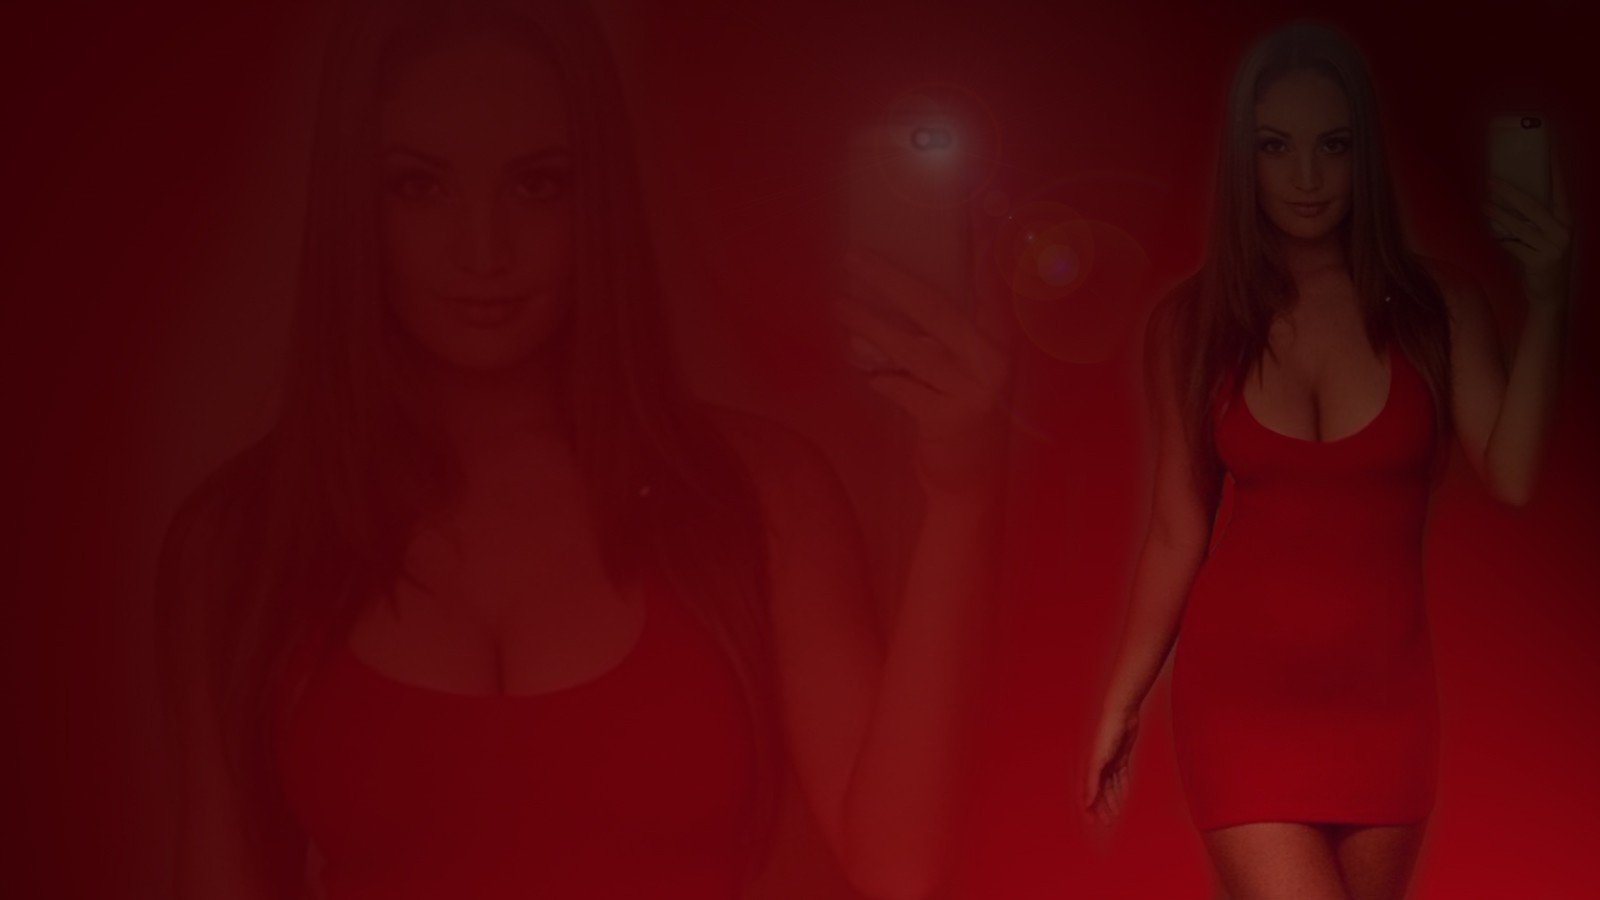 red dress, Red, Chivette, Photo manipulation Wallpaper